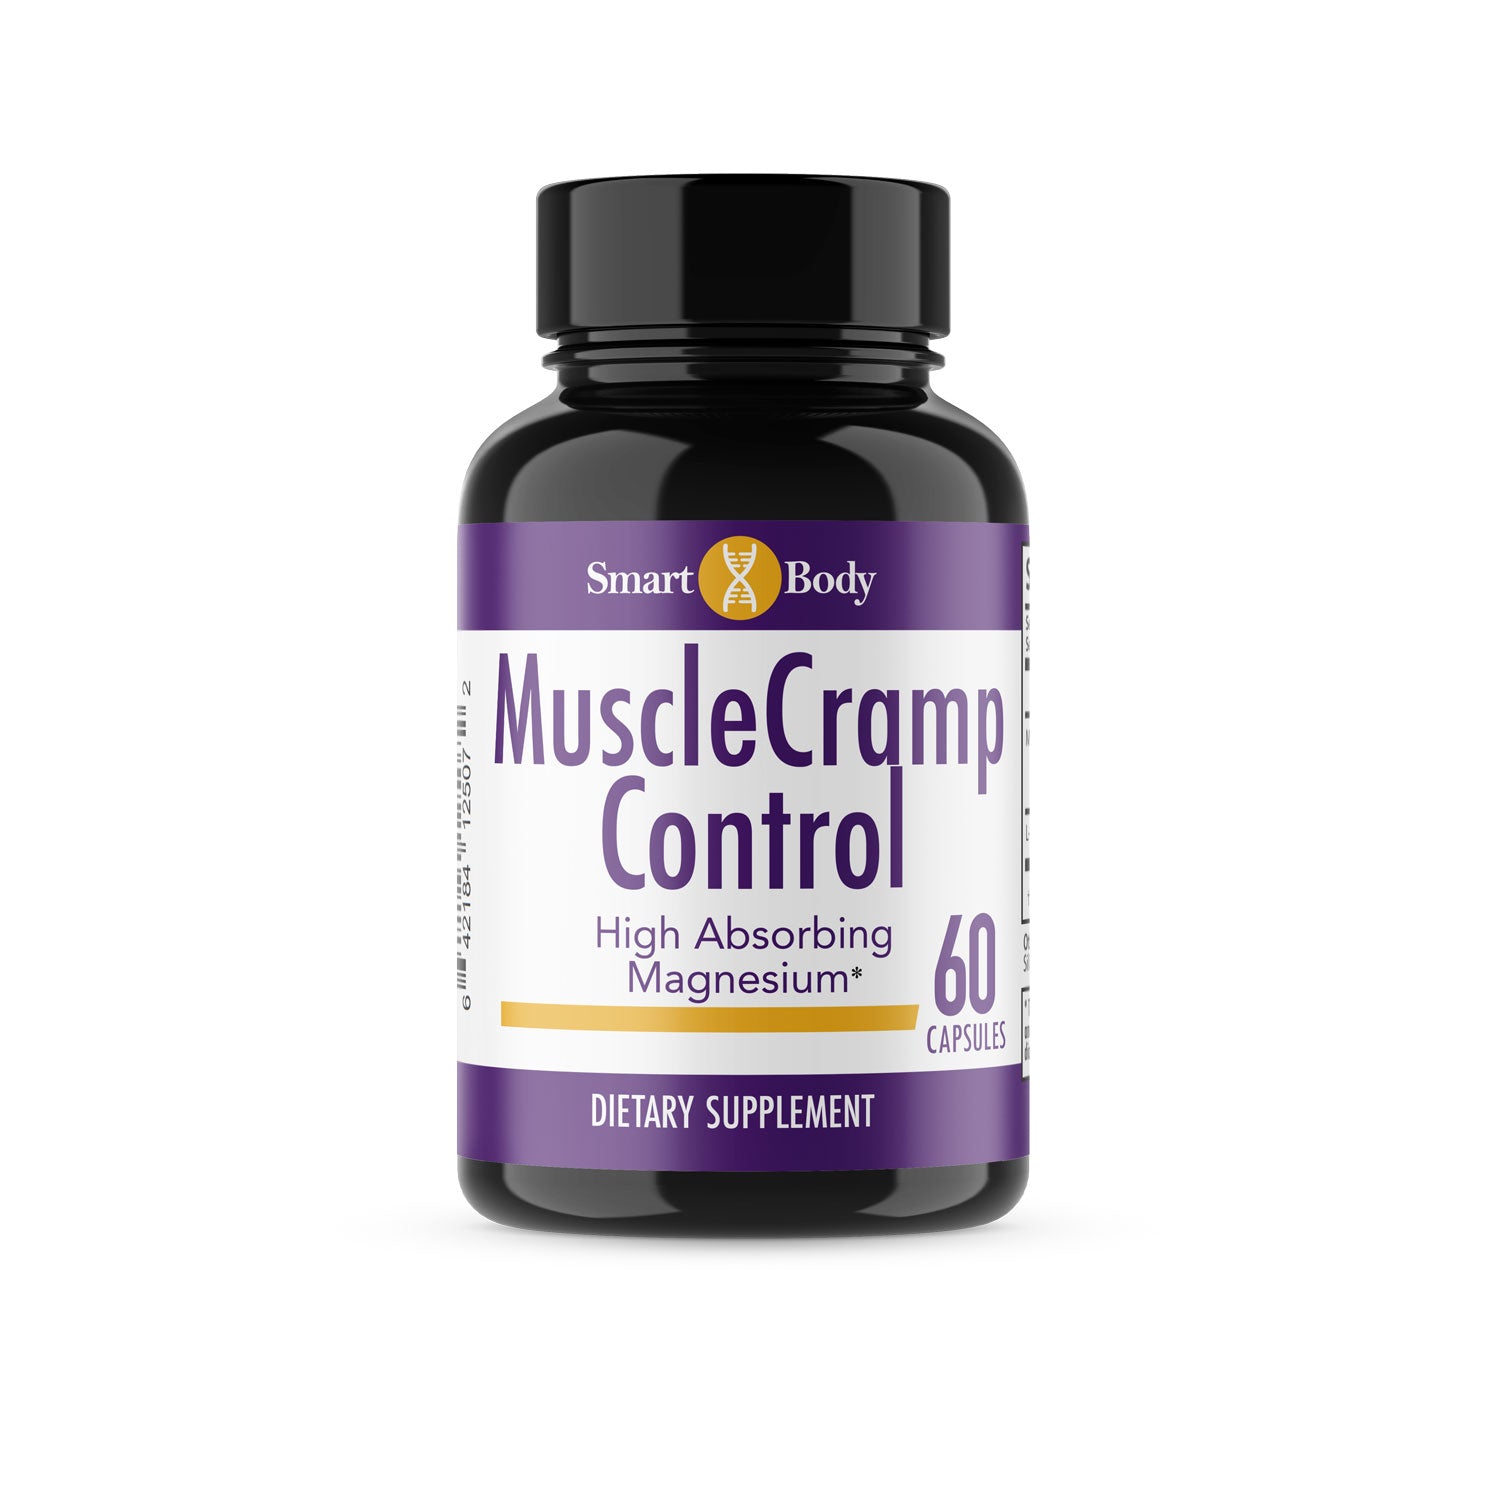 Muscle Cramp Control - High Absorption Magnesium